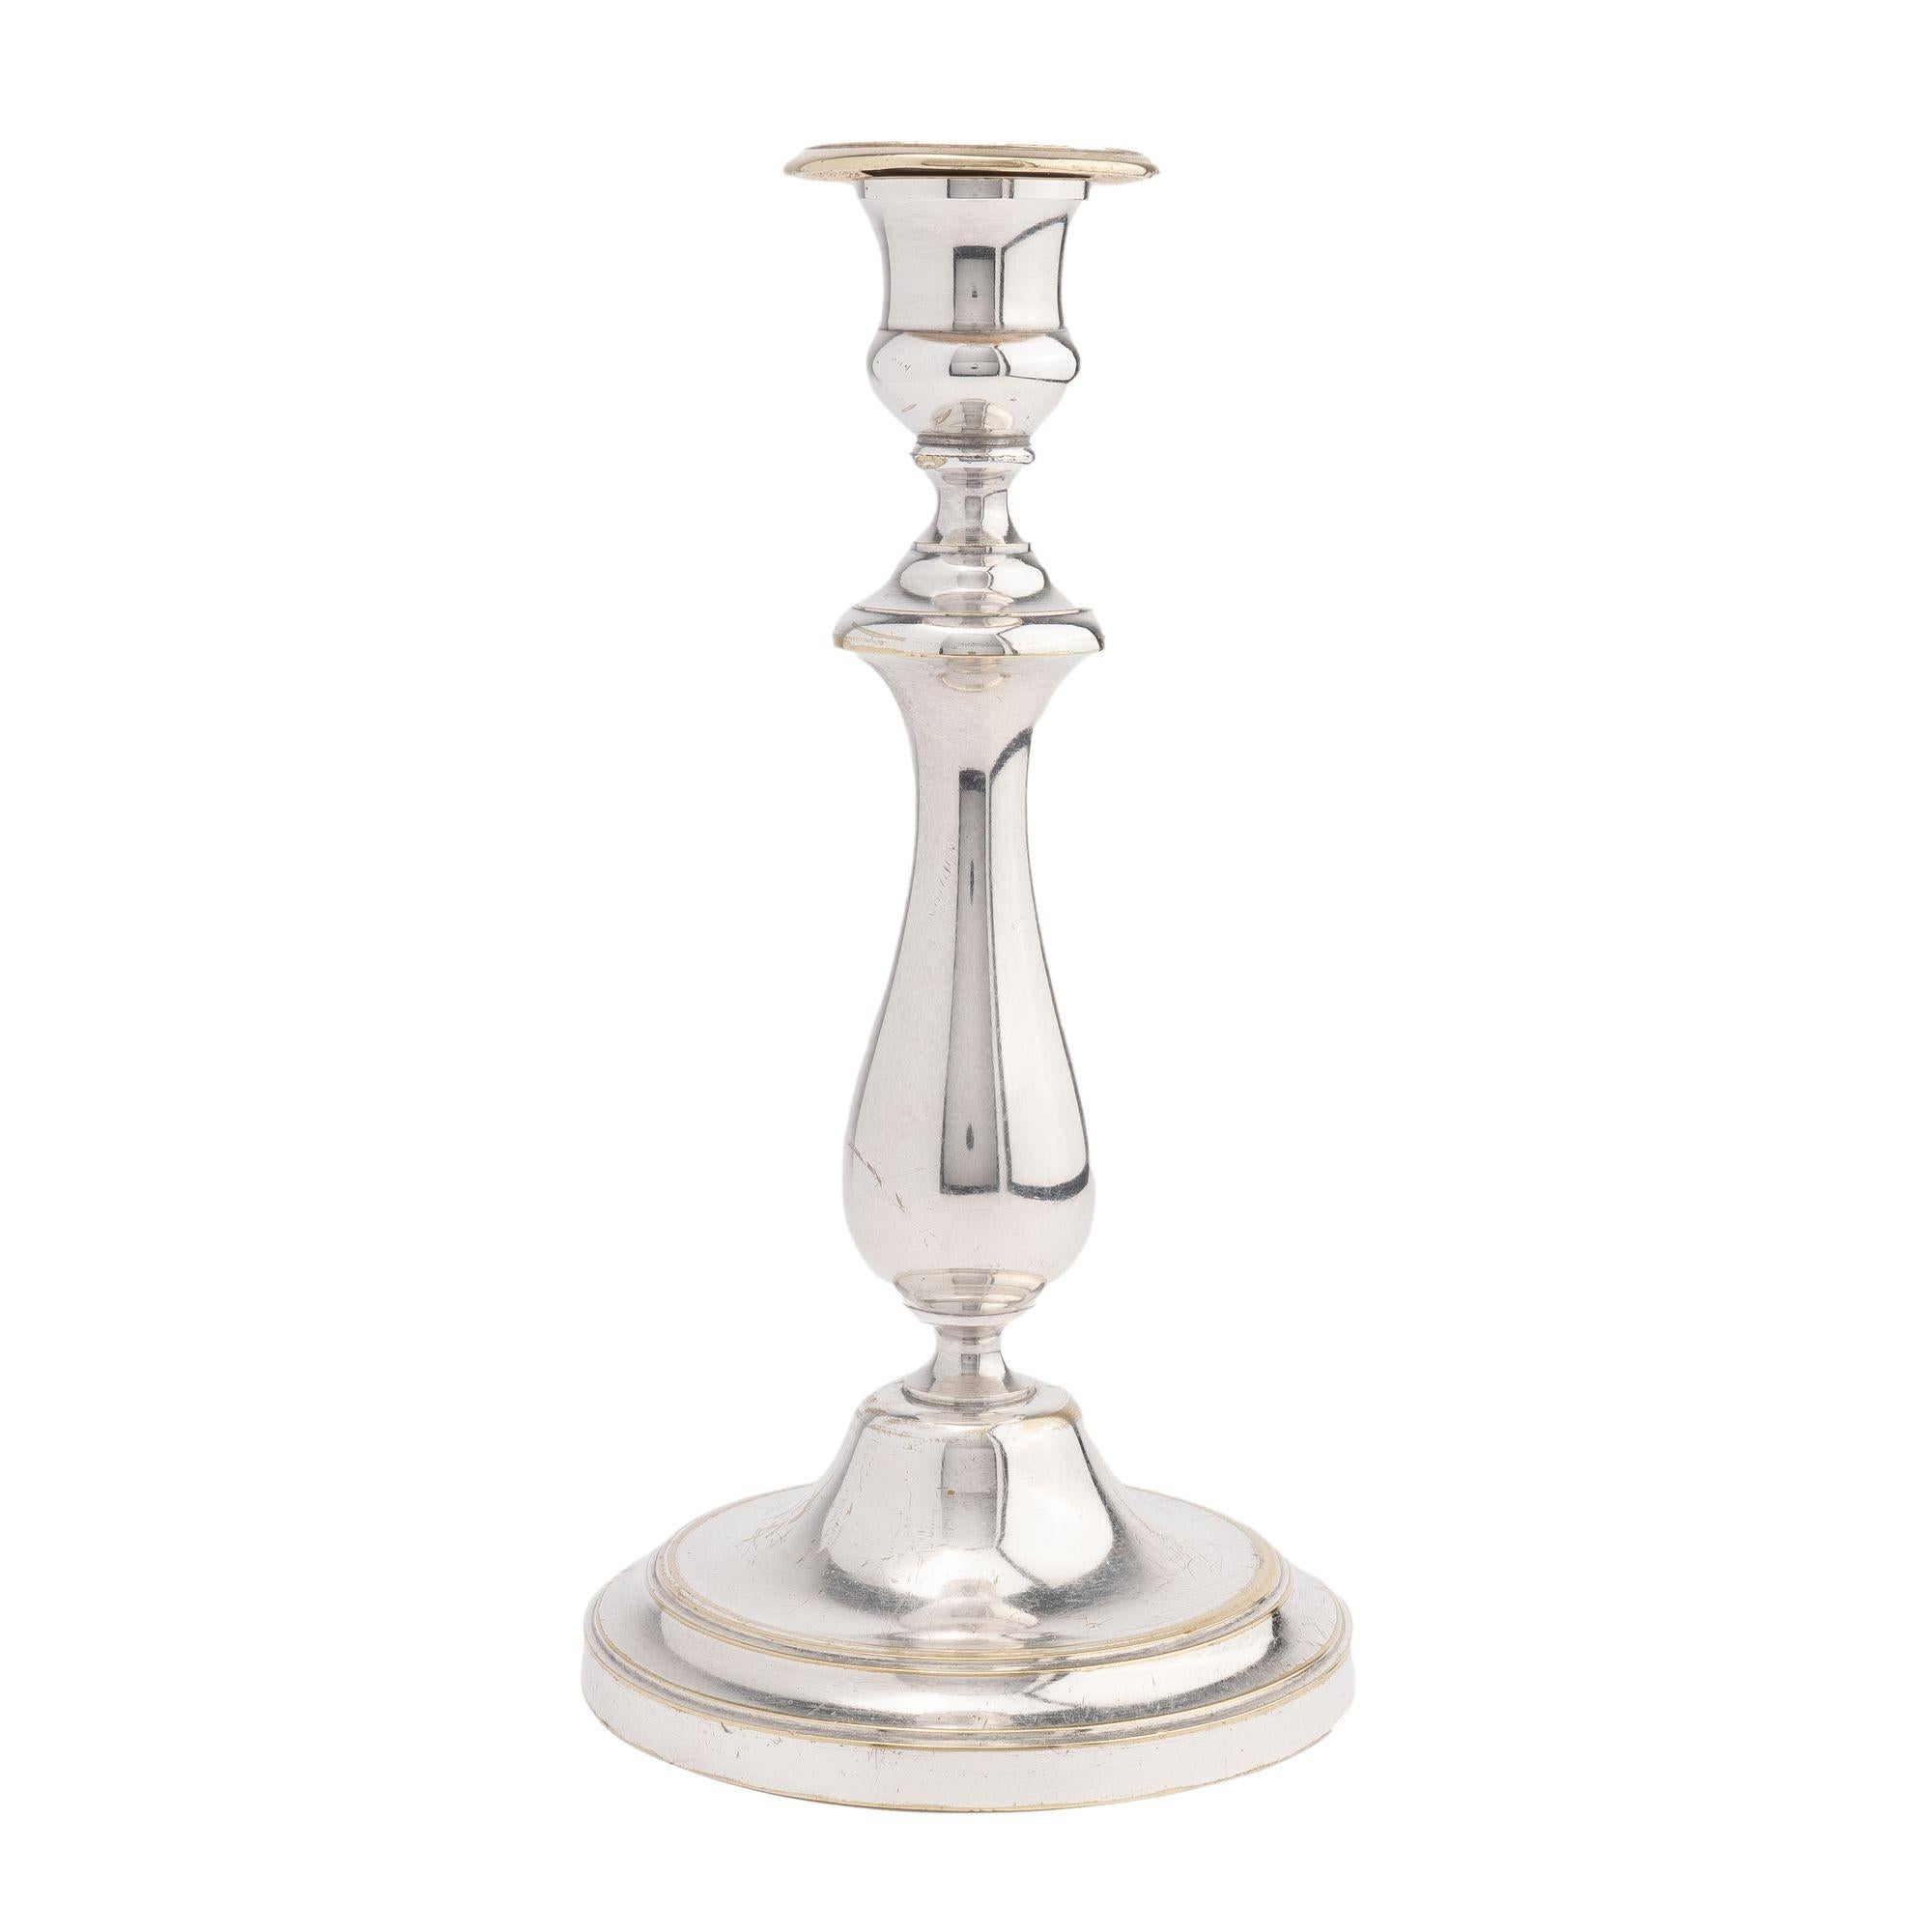 Charles X period silvered brass candlestick. The candlestick rests on a raised circular footed base, centering on a dome which features a waisted transition to the baluster form shaft. The shaft is topped by an urn form candle cup with bobeshe. The